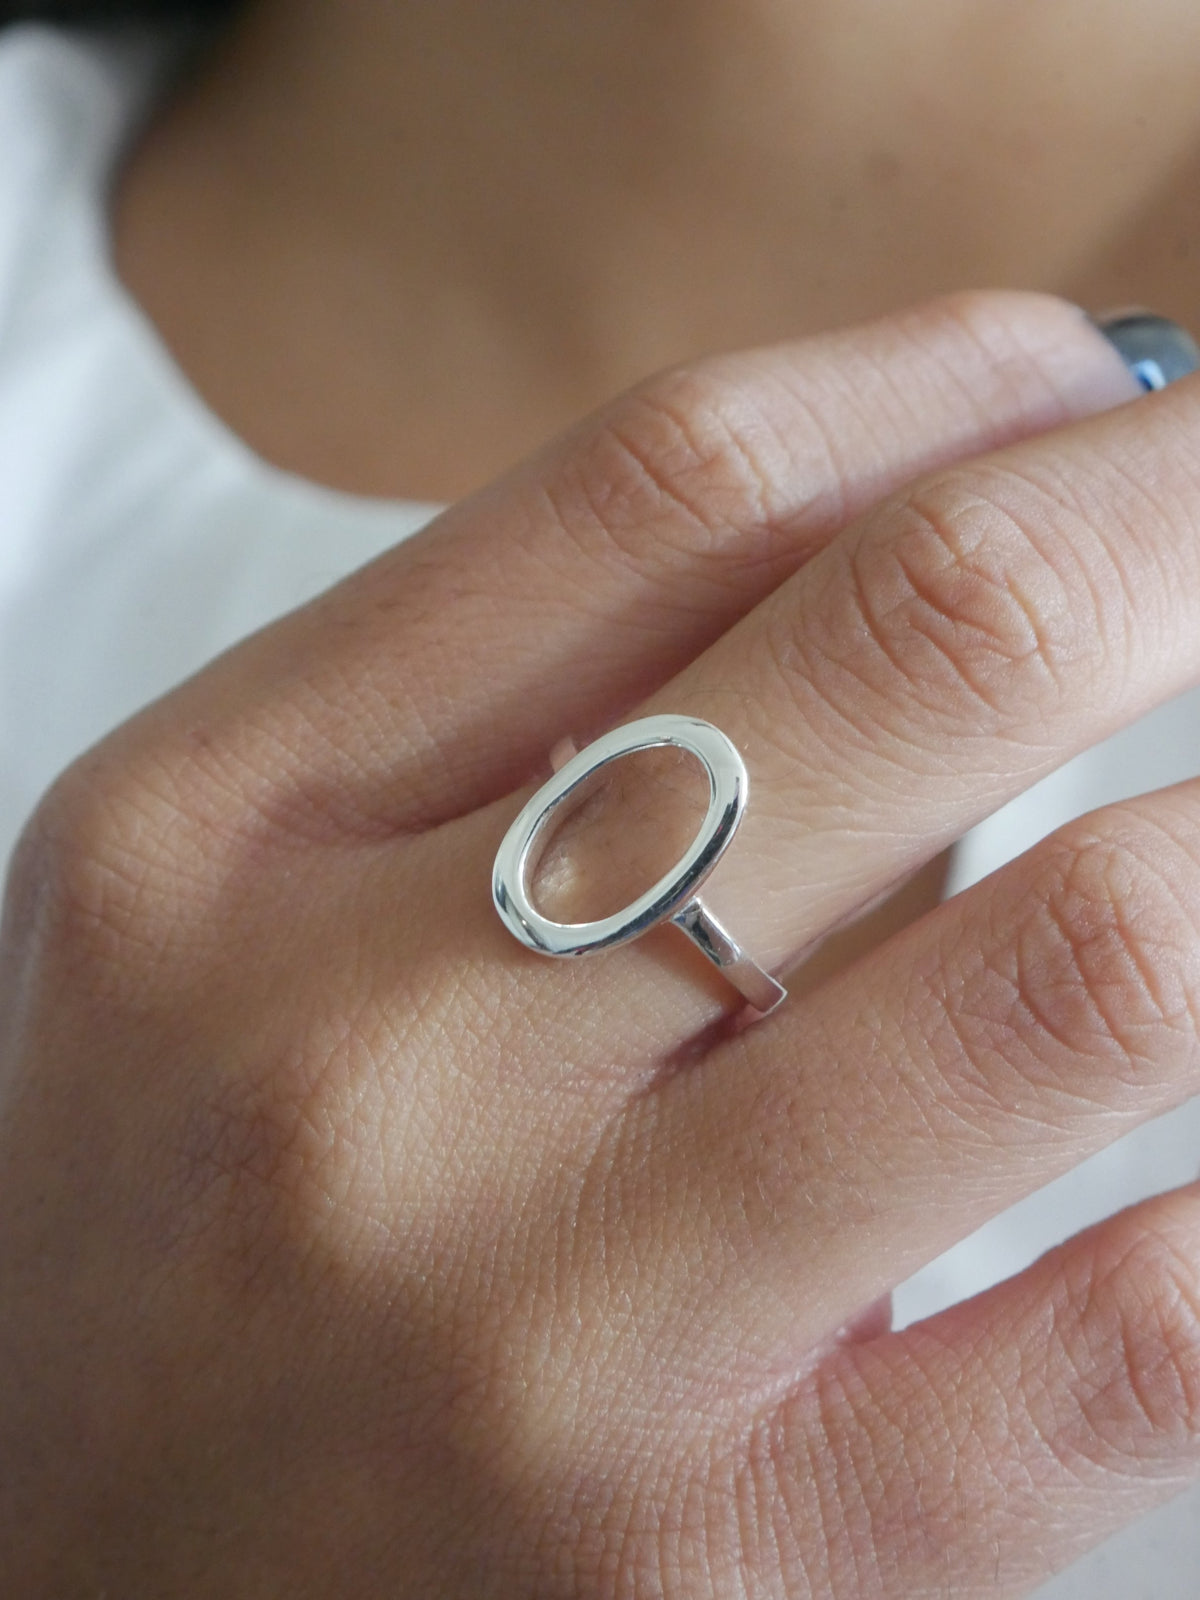 rings, silver rings, dainty rings, circle rings, jewelry, white gold rings, Circle rings white gold .925 sterling silver waterproof . Dainty rings for men and woman trending on instagram and tiktok. Influencer rings. Gift ideas. Shopping in Miami. Gift Shop. Souvenir store in Brickell Kesley Boutique, casual rings, minimalist rings, statement rings, gift ideas, fashion jewelry, fine jewelry